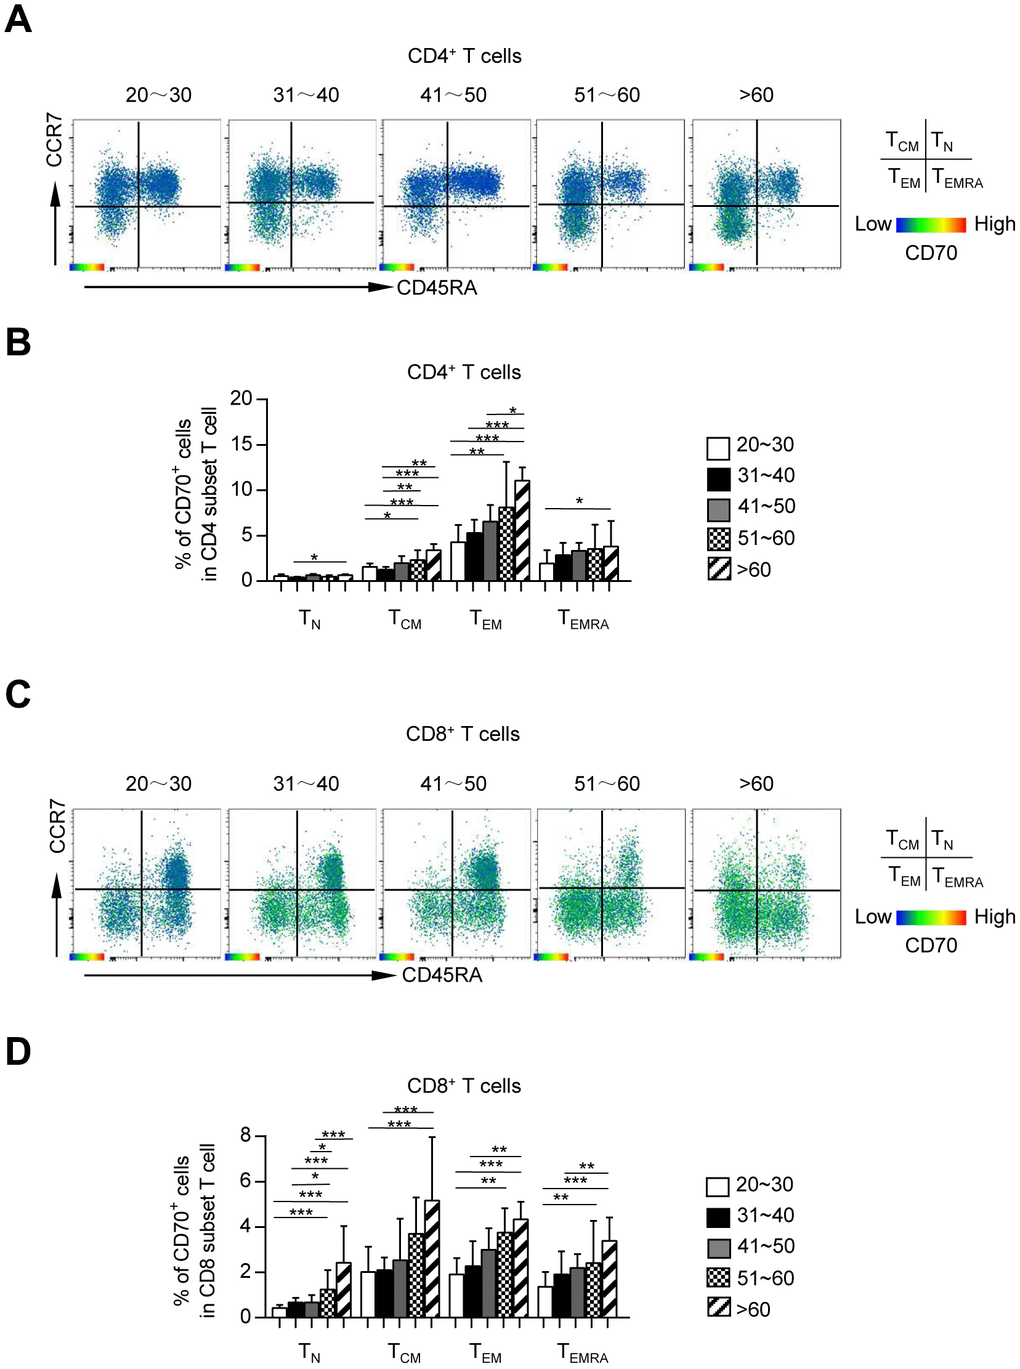 CD70 is preferentially expressed on memory CD4+ and CD8+ T cells. Expression of CD70 on each subset (TN, TCM, TEM, and TEMRA) of CD4+ and CD8+ T cells. Representative flow data (A, C) and box plots (B, D) of the percentage of CD70 expression on each subset of CD4+ (A–B) and CD8+ (C–D) T cells from five different age groups (n = 34-56 in each group). Data are shown as the median ± 95% confidence interval (CI). The p-values were obtained by Kruskal-Wallis test followed by Dunn’s multiple comparisons test. *p p p 